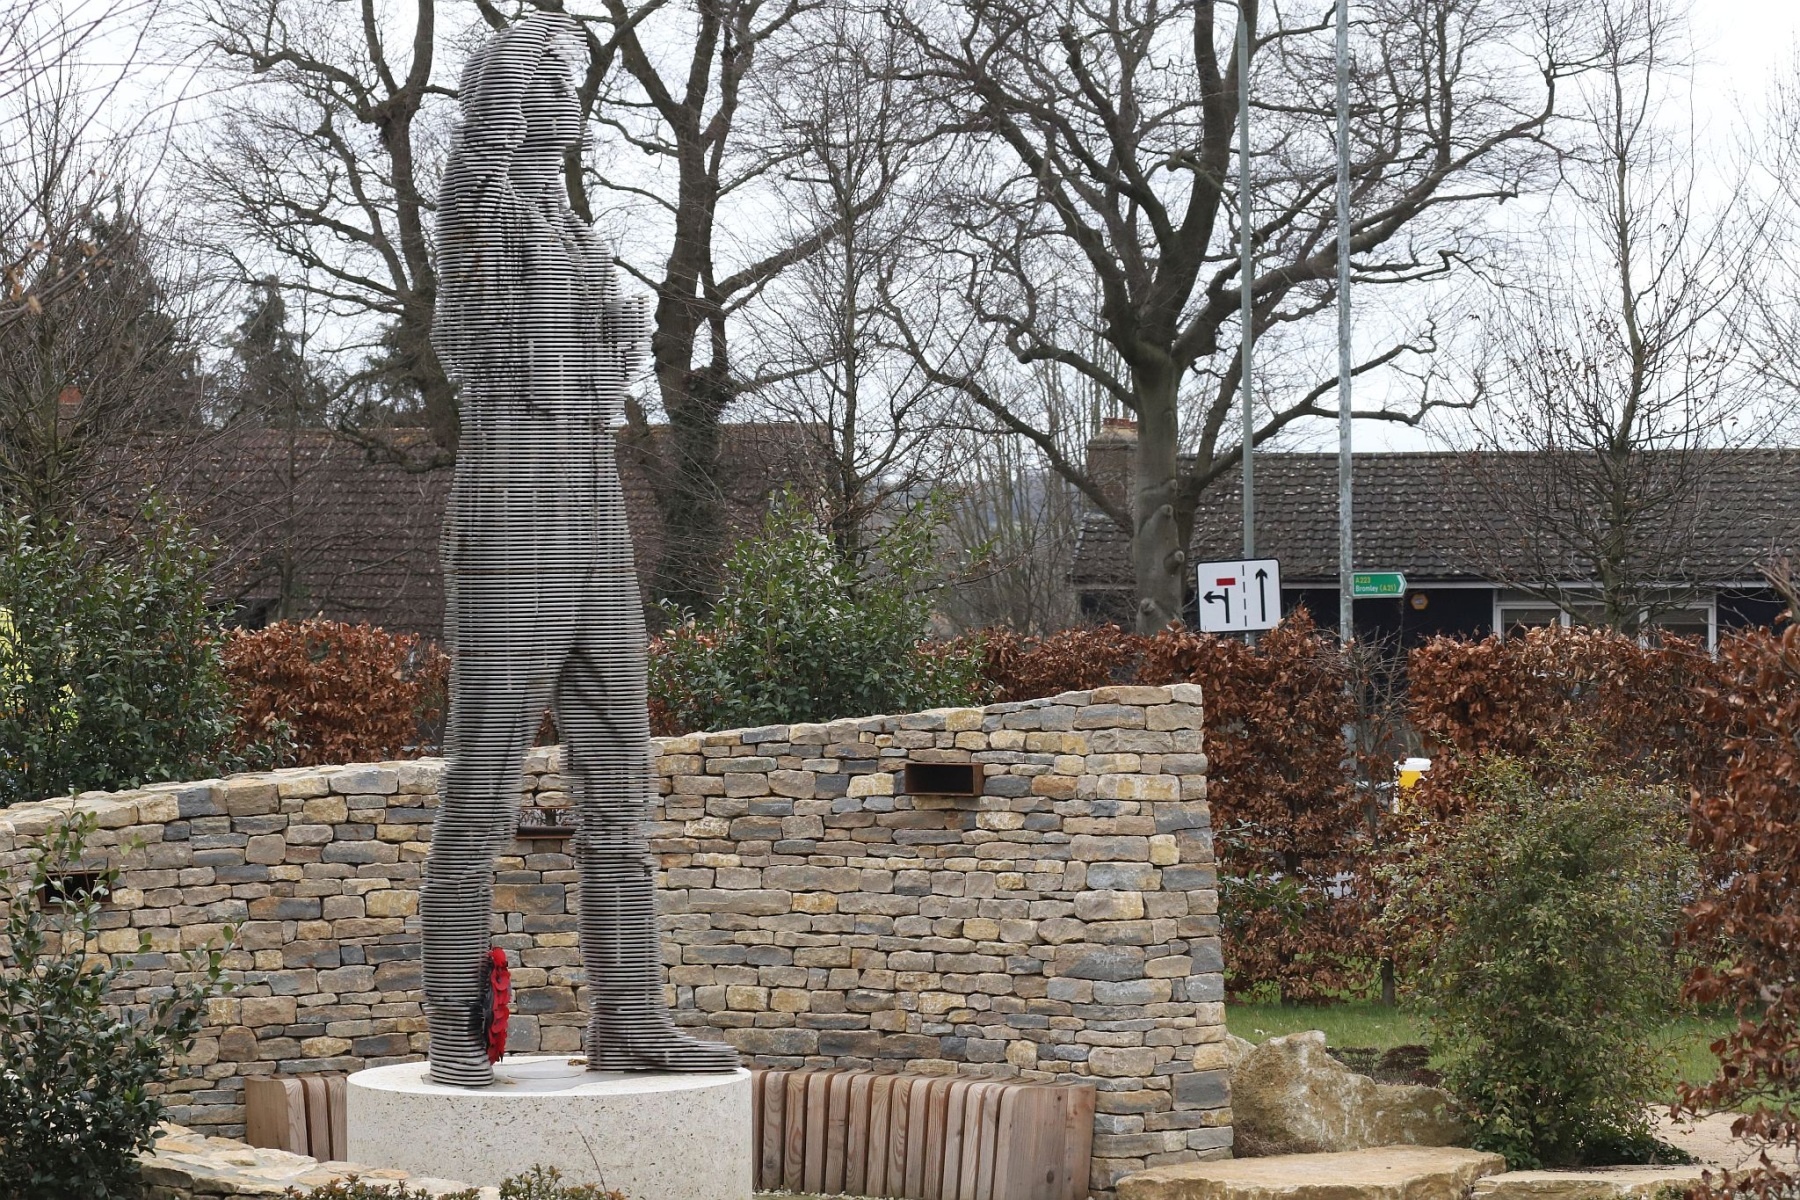 RAF Biggin Hill Memorial "The Strongest Link" featuring a pilot looking to the sky which was unveiled in 2022 to remember the RAF station's contribution to the defence of Great Britain.